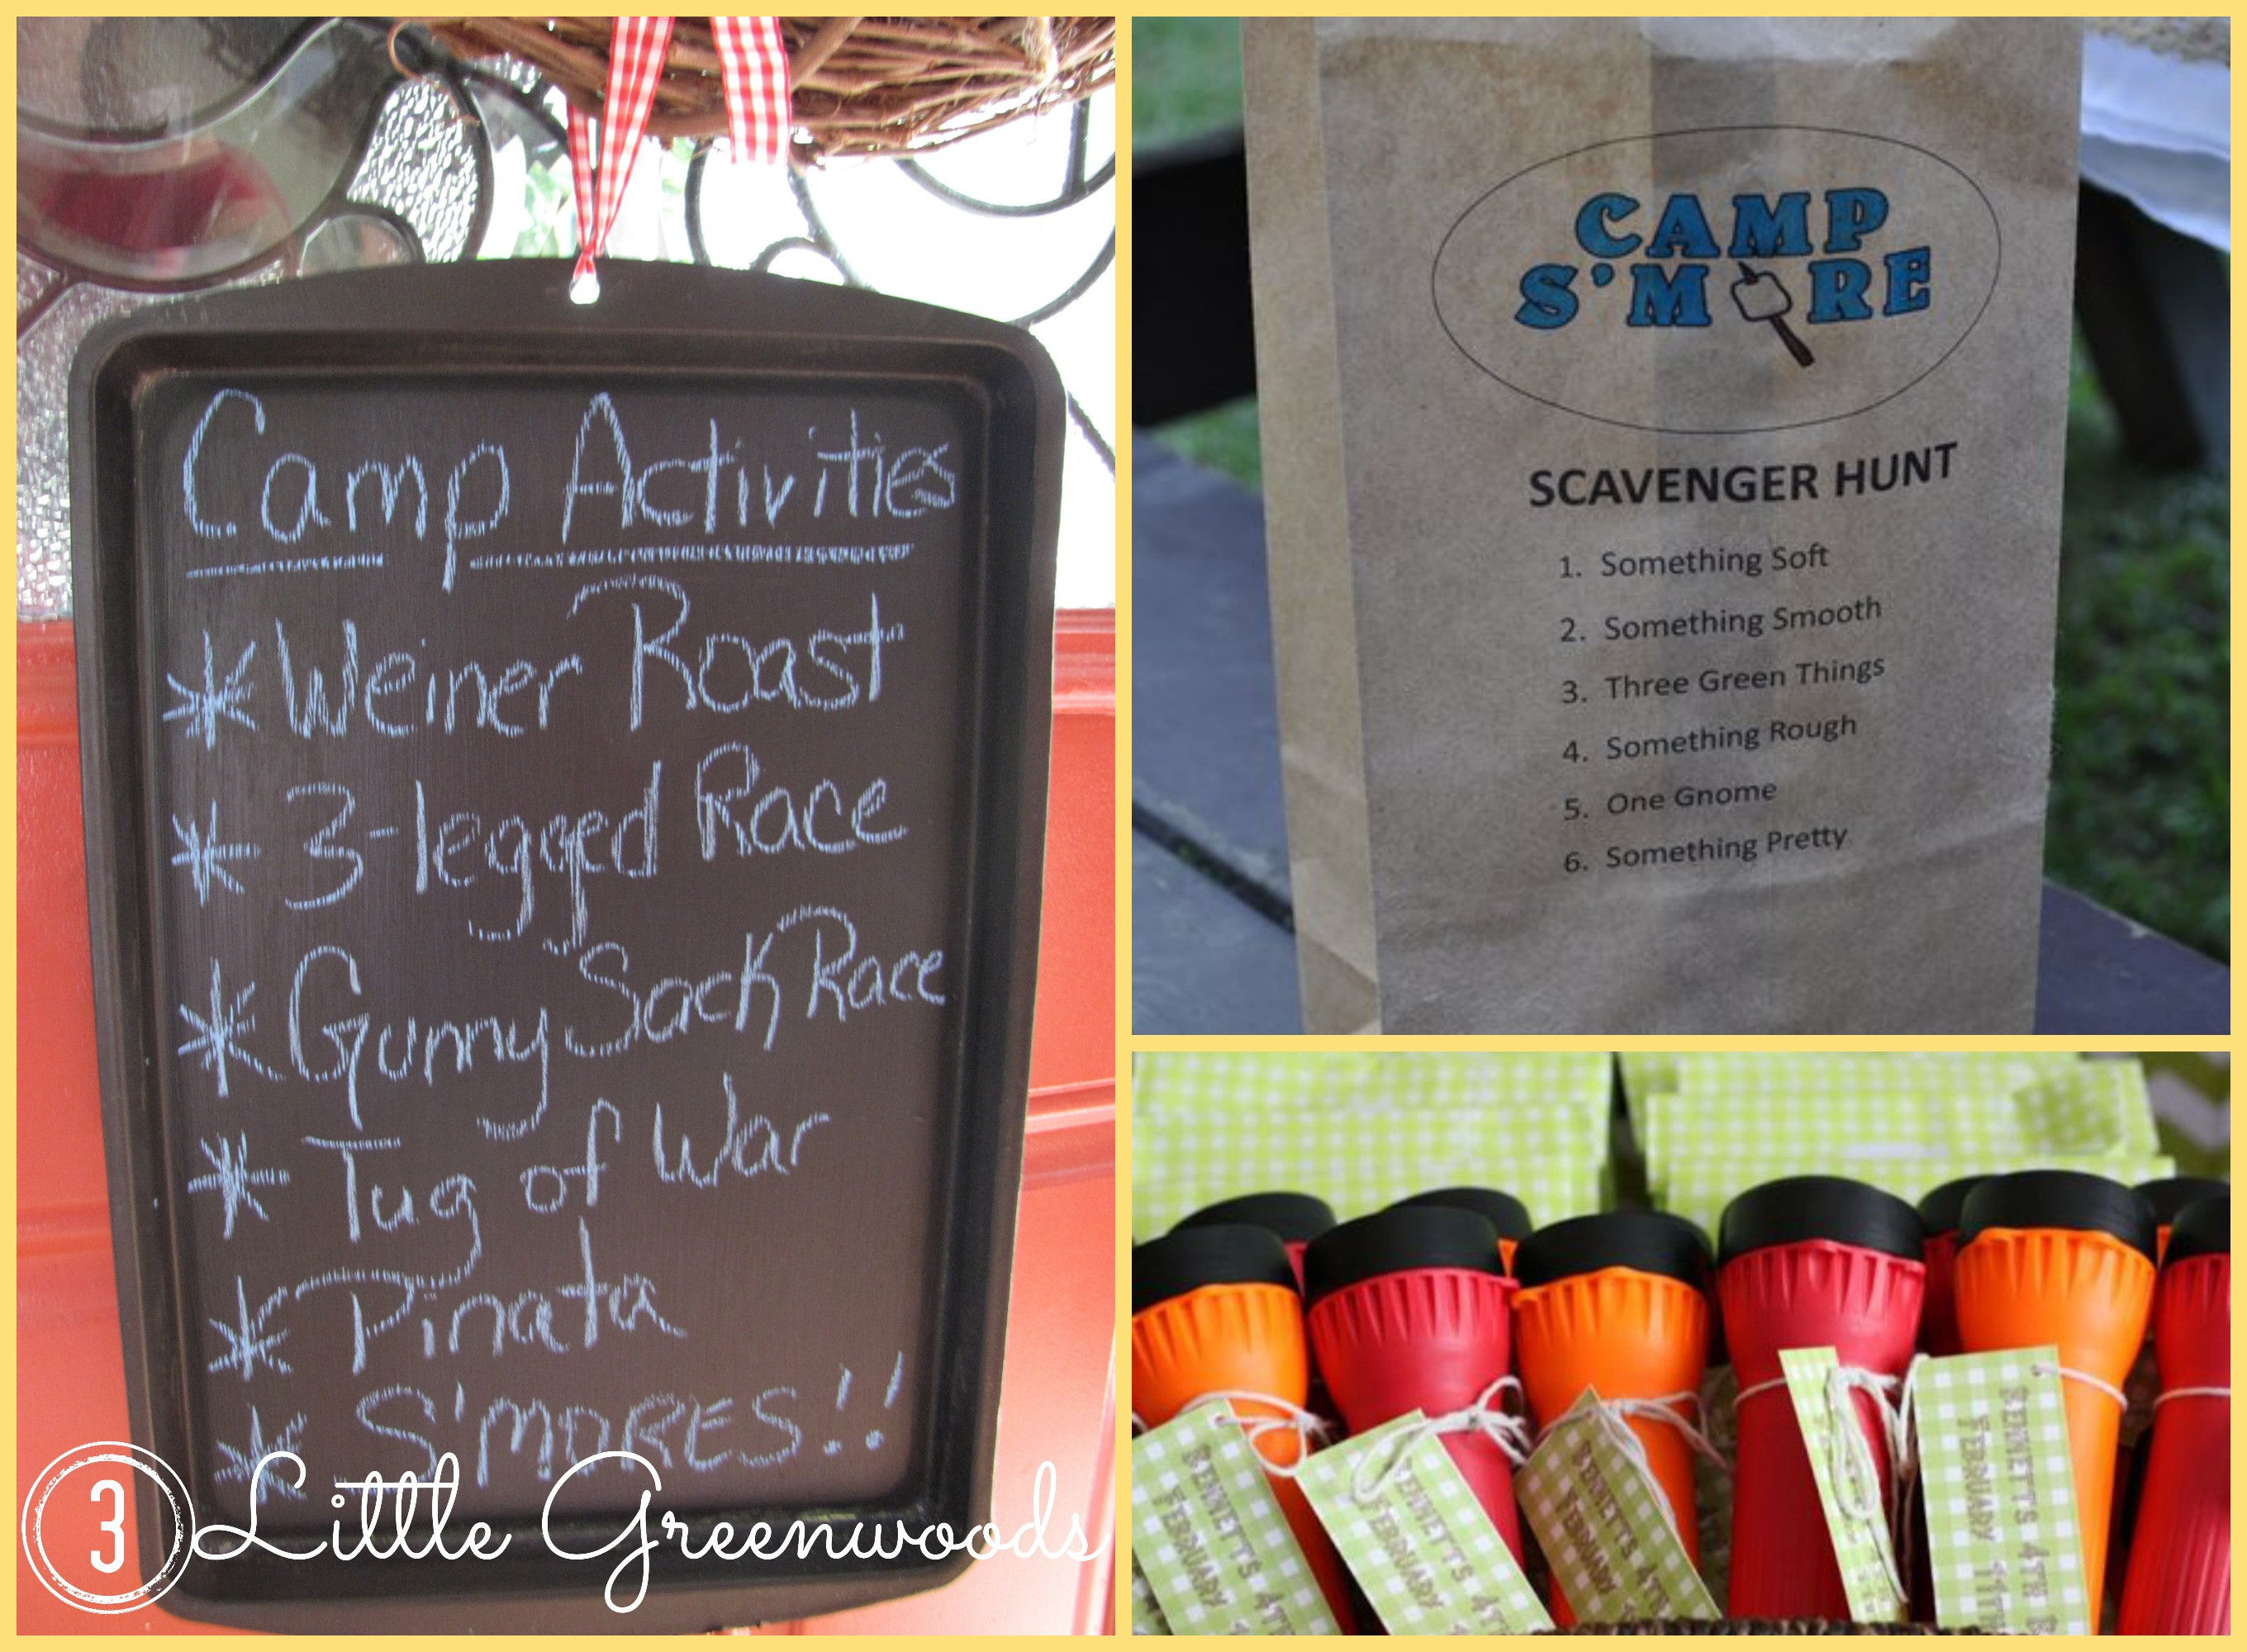 Backyard Campout Birthday Party Ideas
 Backyard Campout Party Inspiration 3 Little Greenwoods